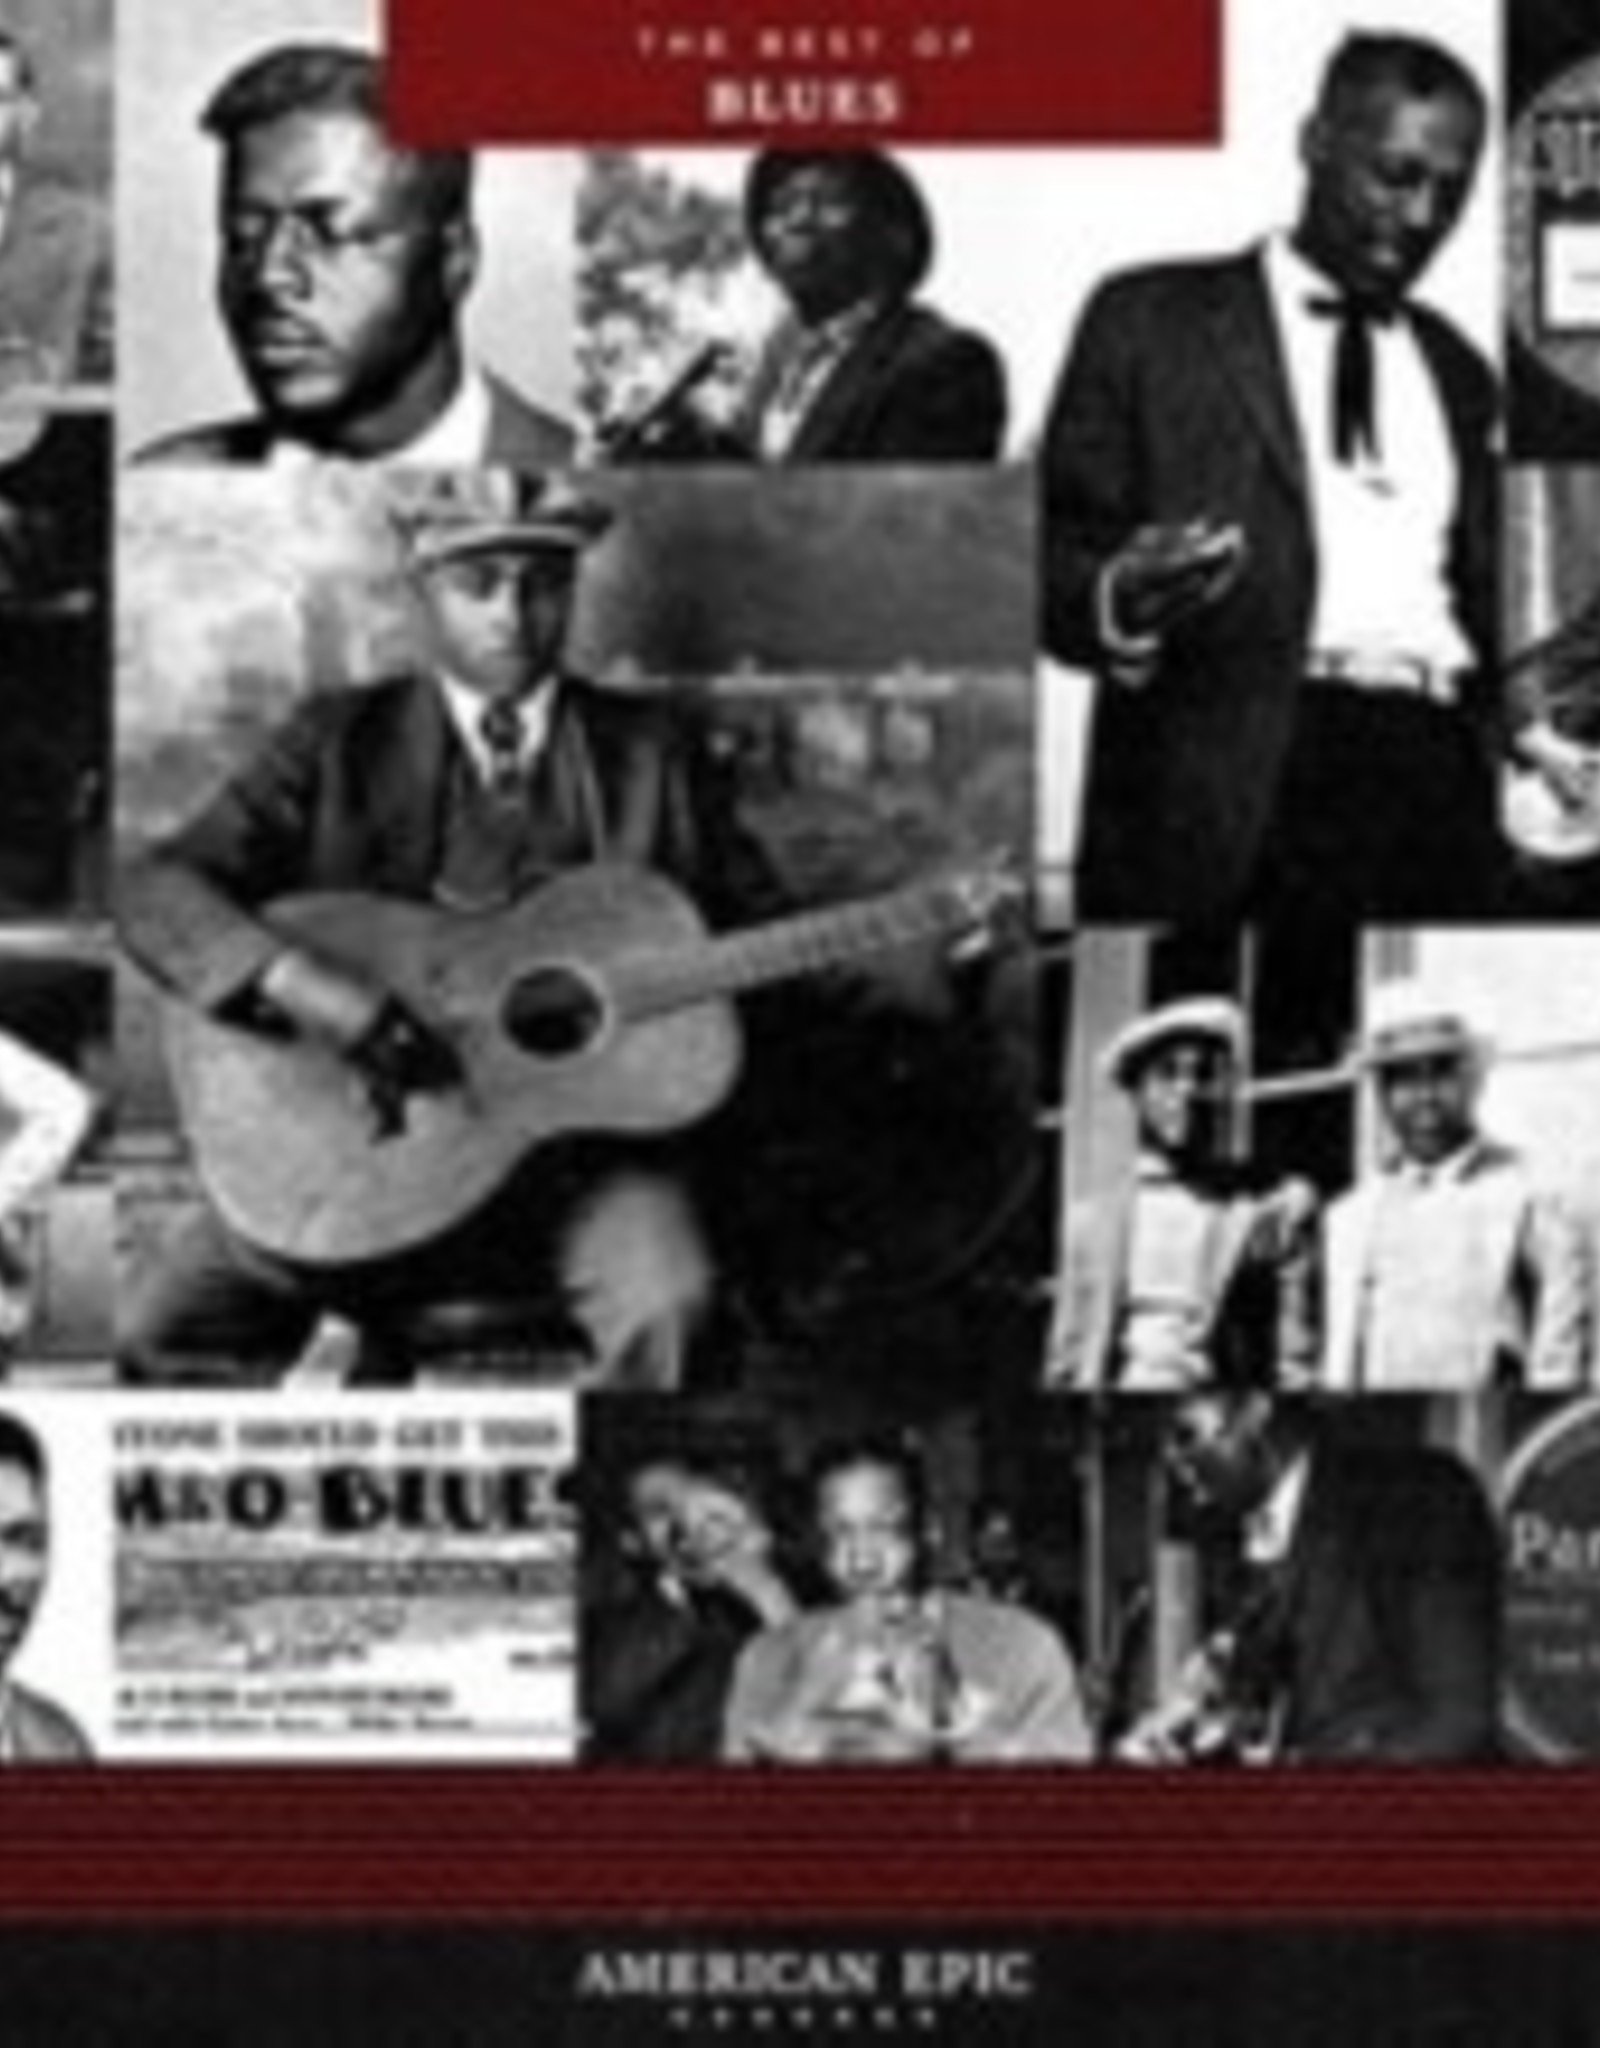 American Epic: Best of Blues